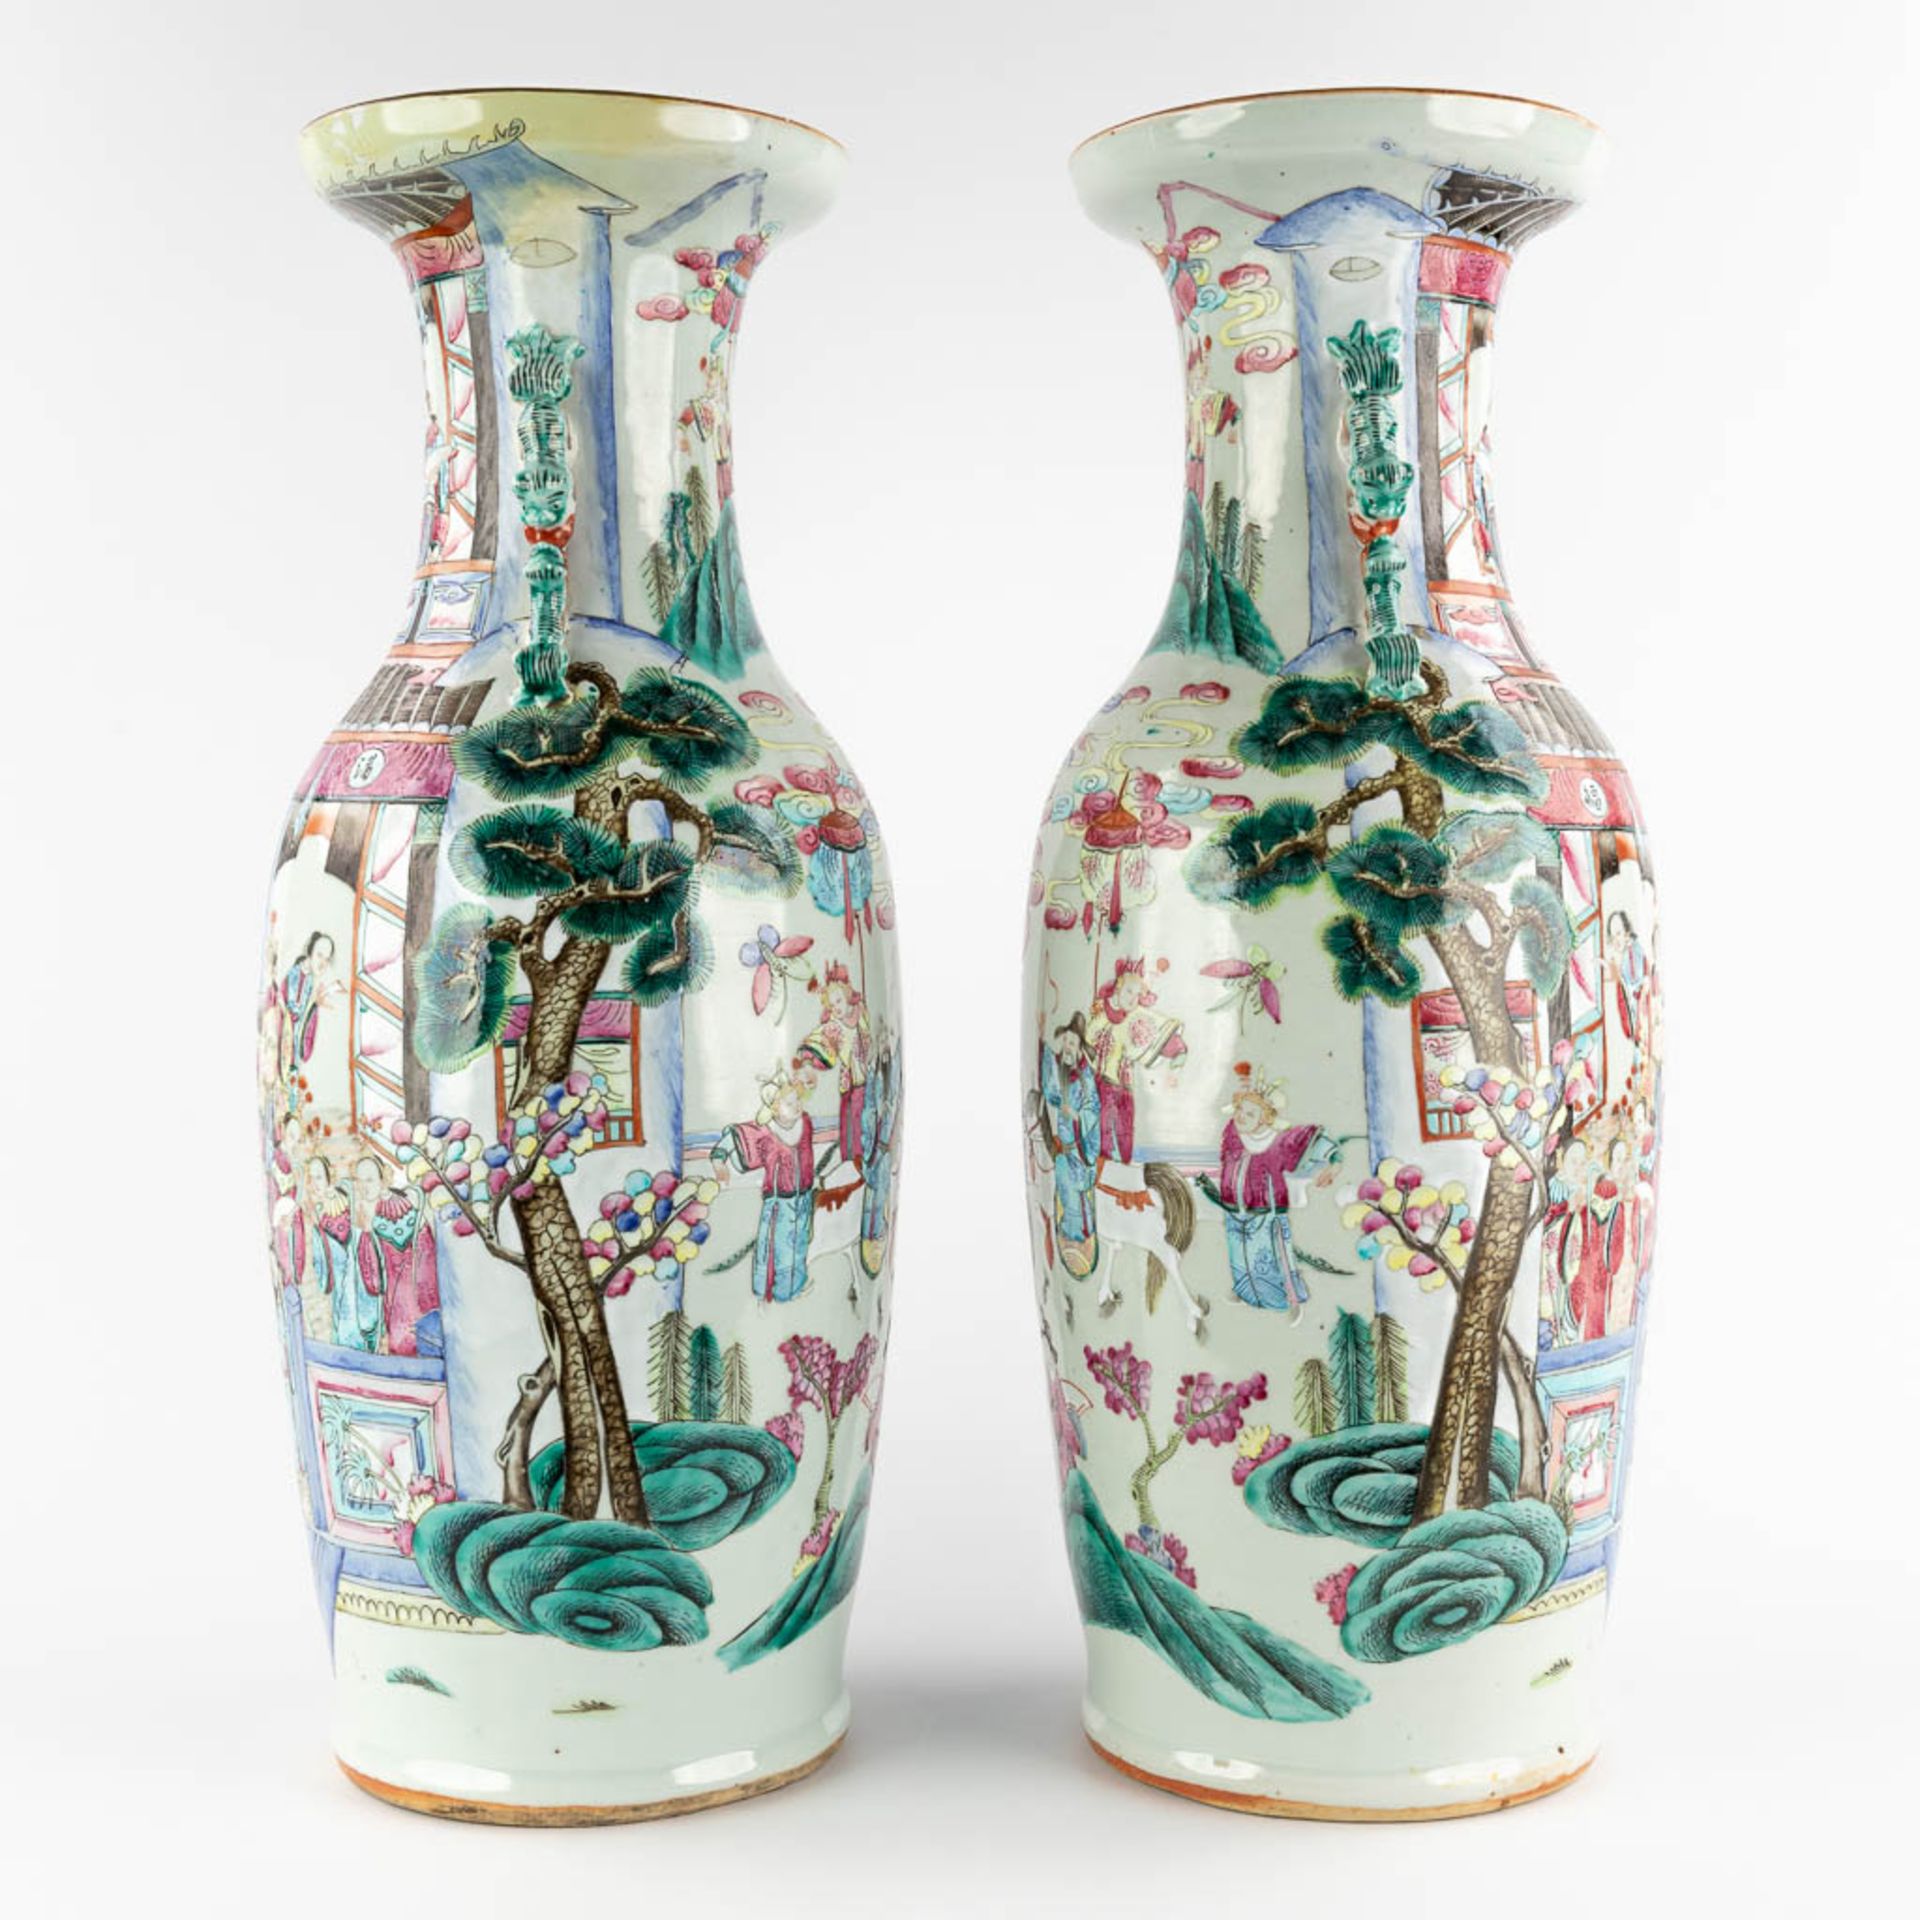 A pair of Chinese vases with Famille Rose vases with a temple scène, 19th C. (H:61 x D:23 cm) - Image 3 of 12